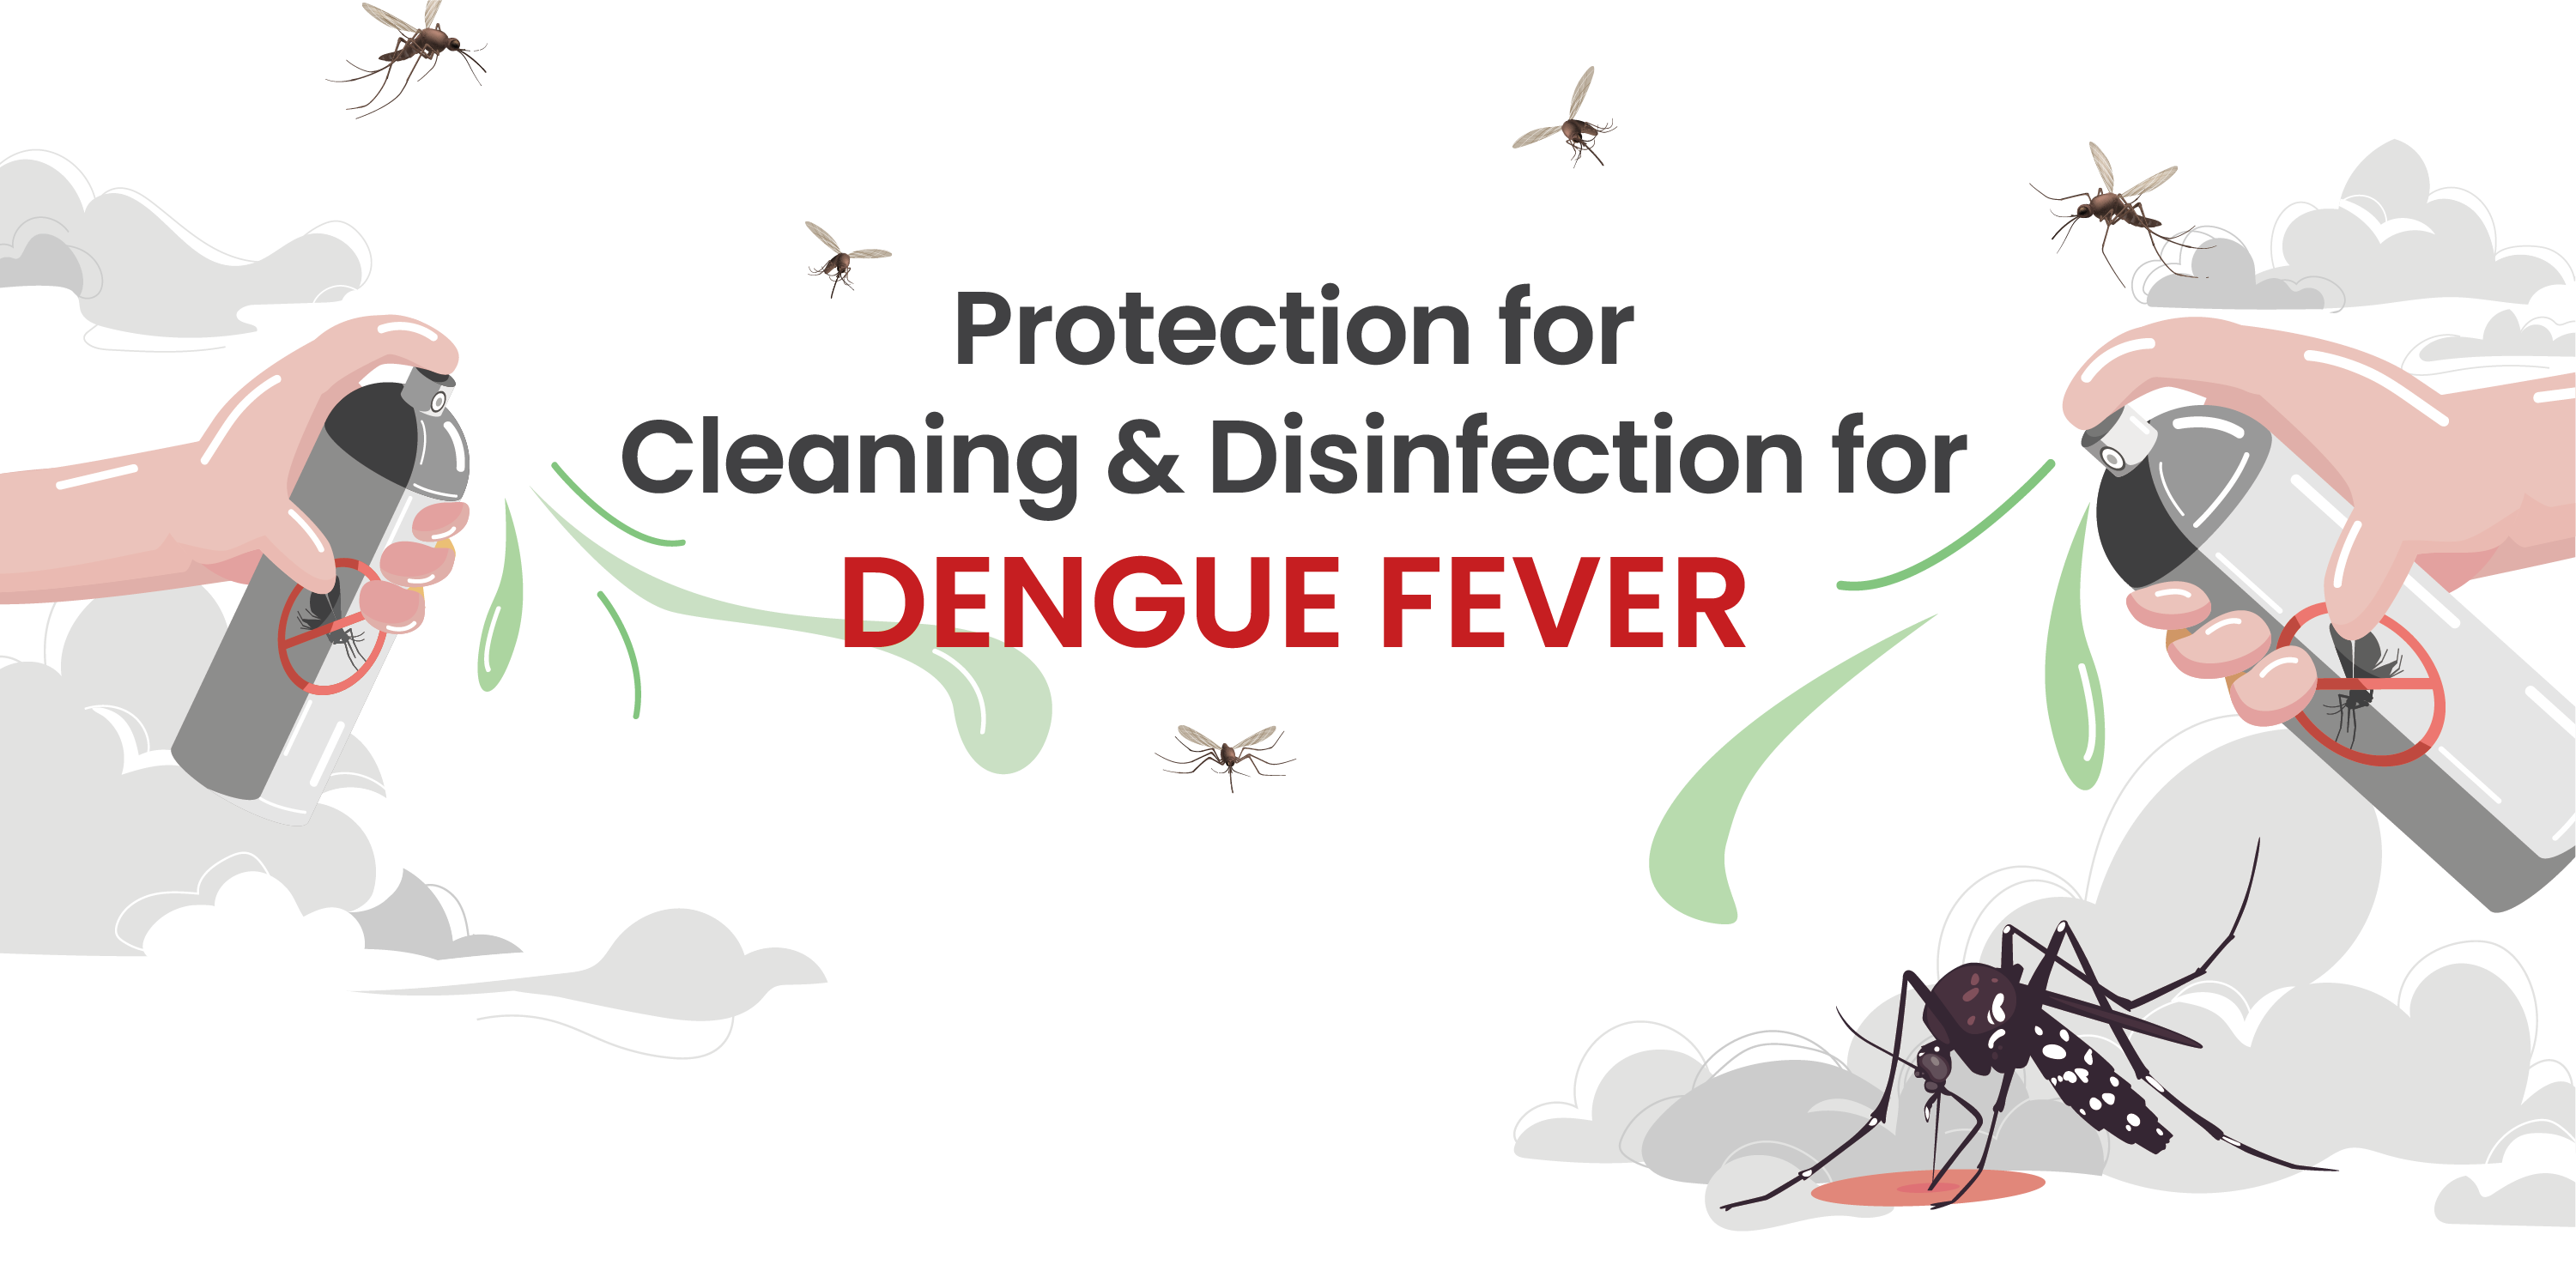 Protection for Cleaning & Disinfection for DENGUE FEVER